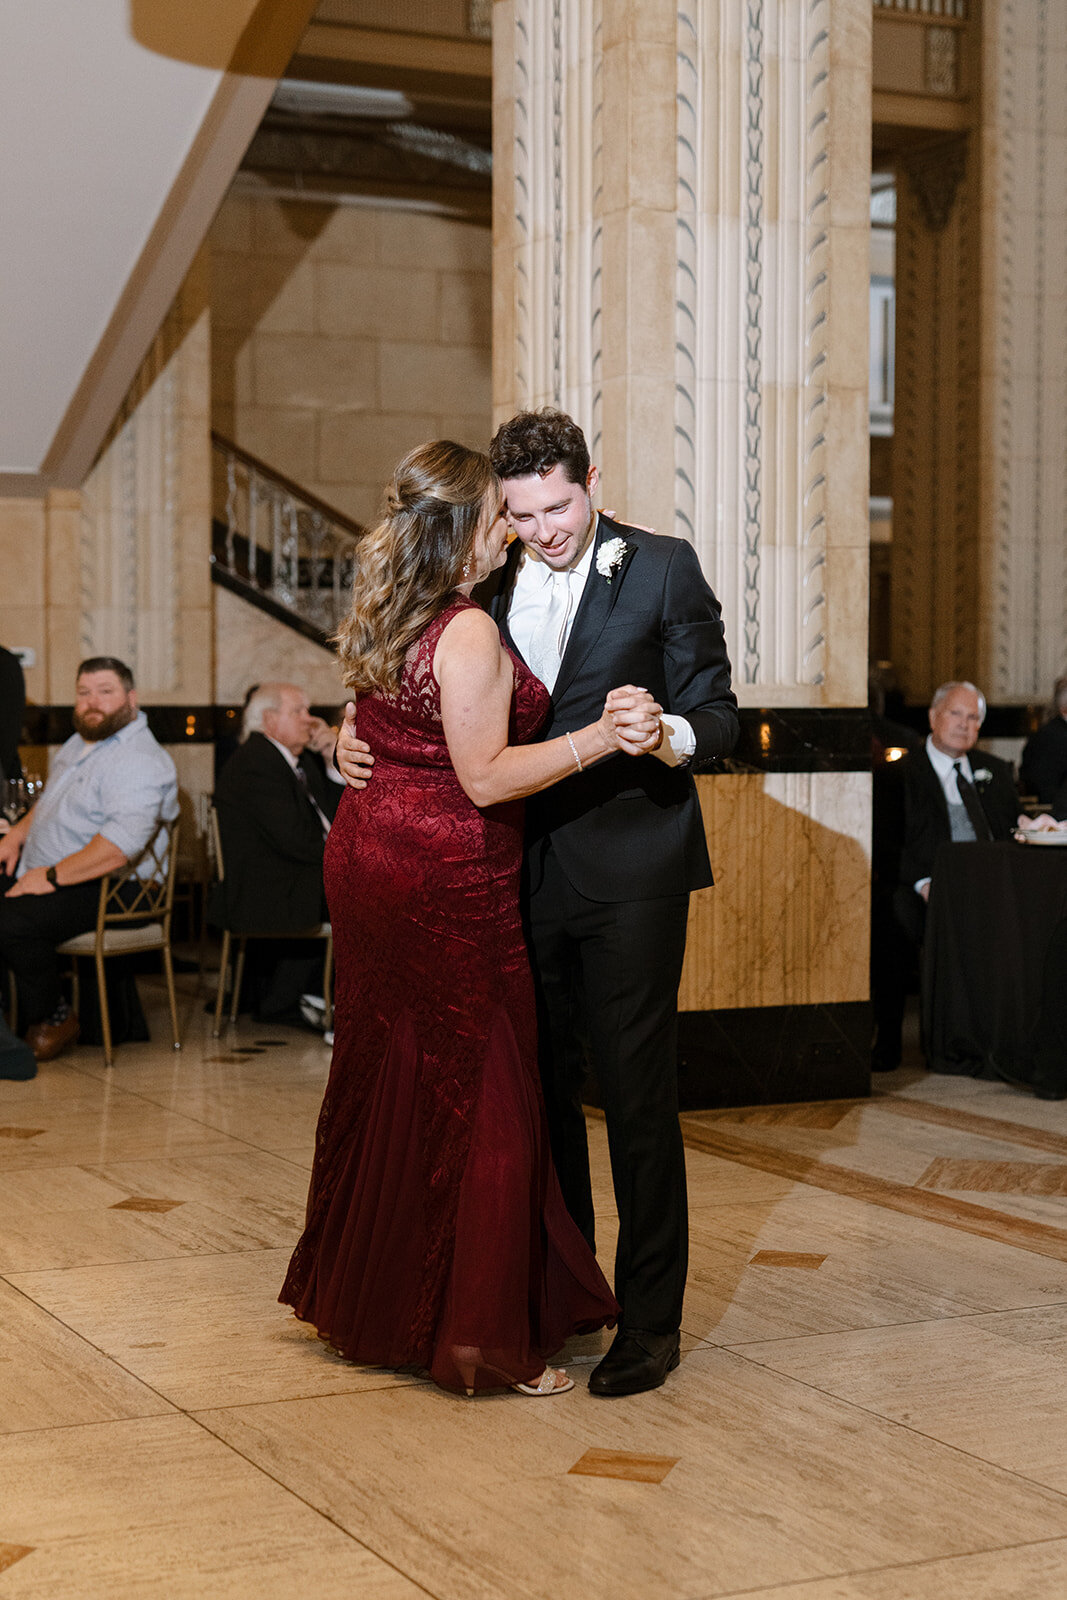 Kylie and Jack at The Grand Hall - Kansas City Wedding Photograpy - Nick and Lexie Photo Film-889